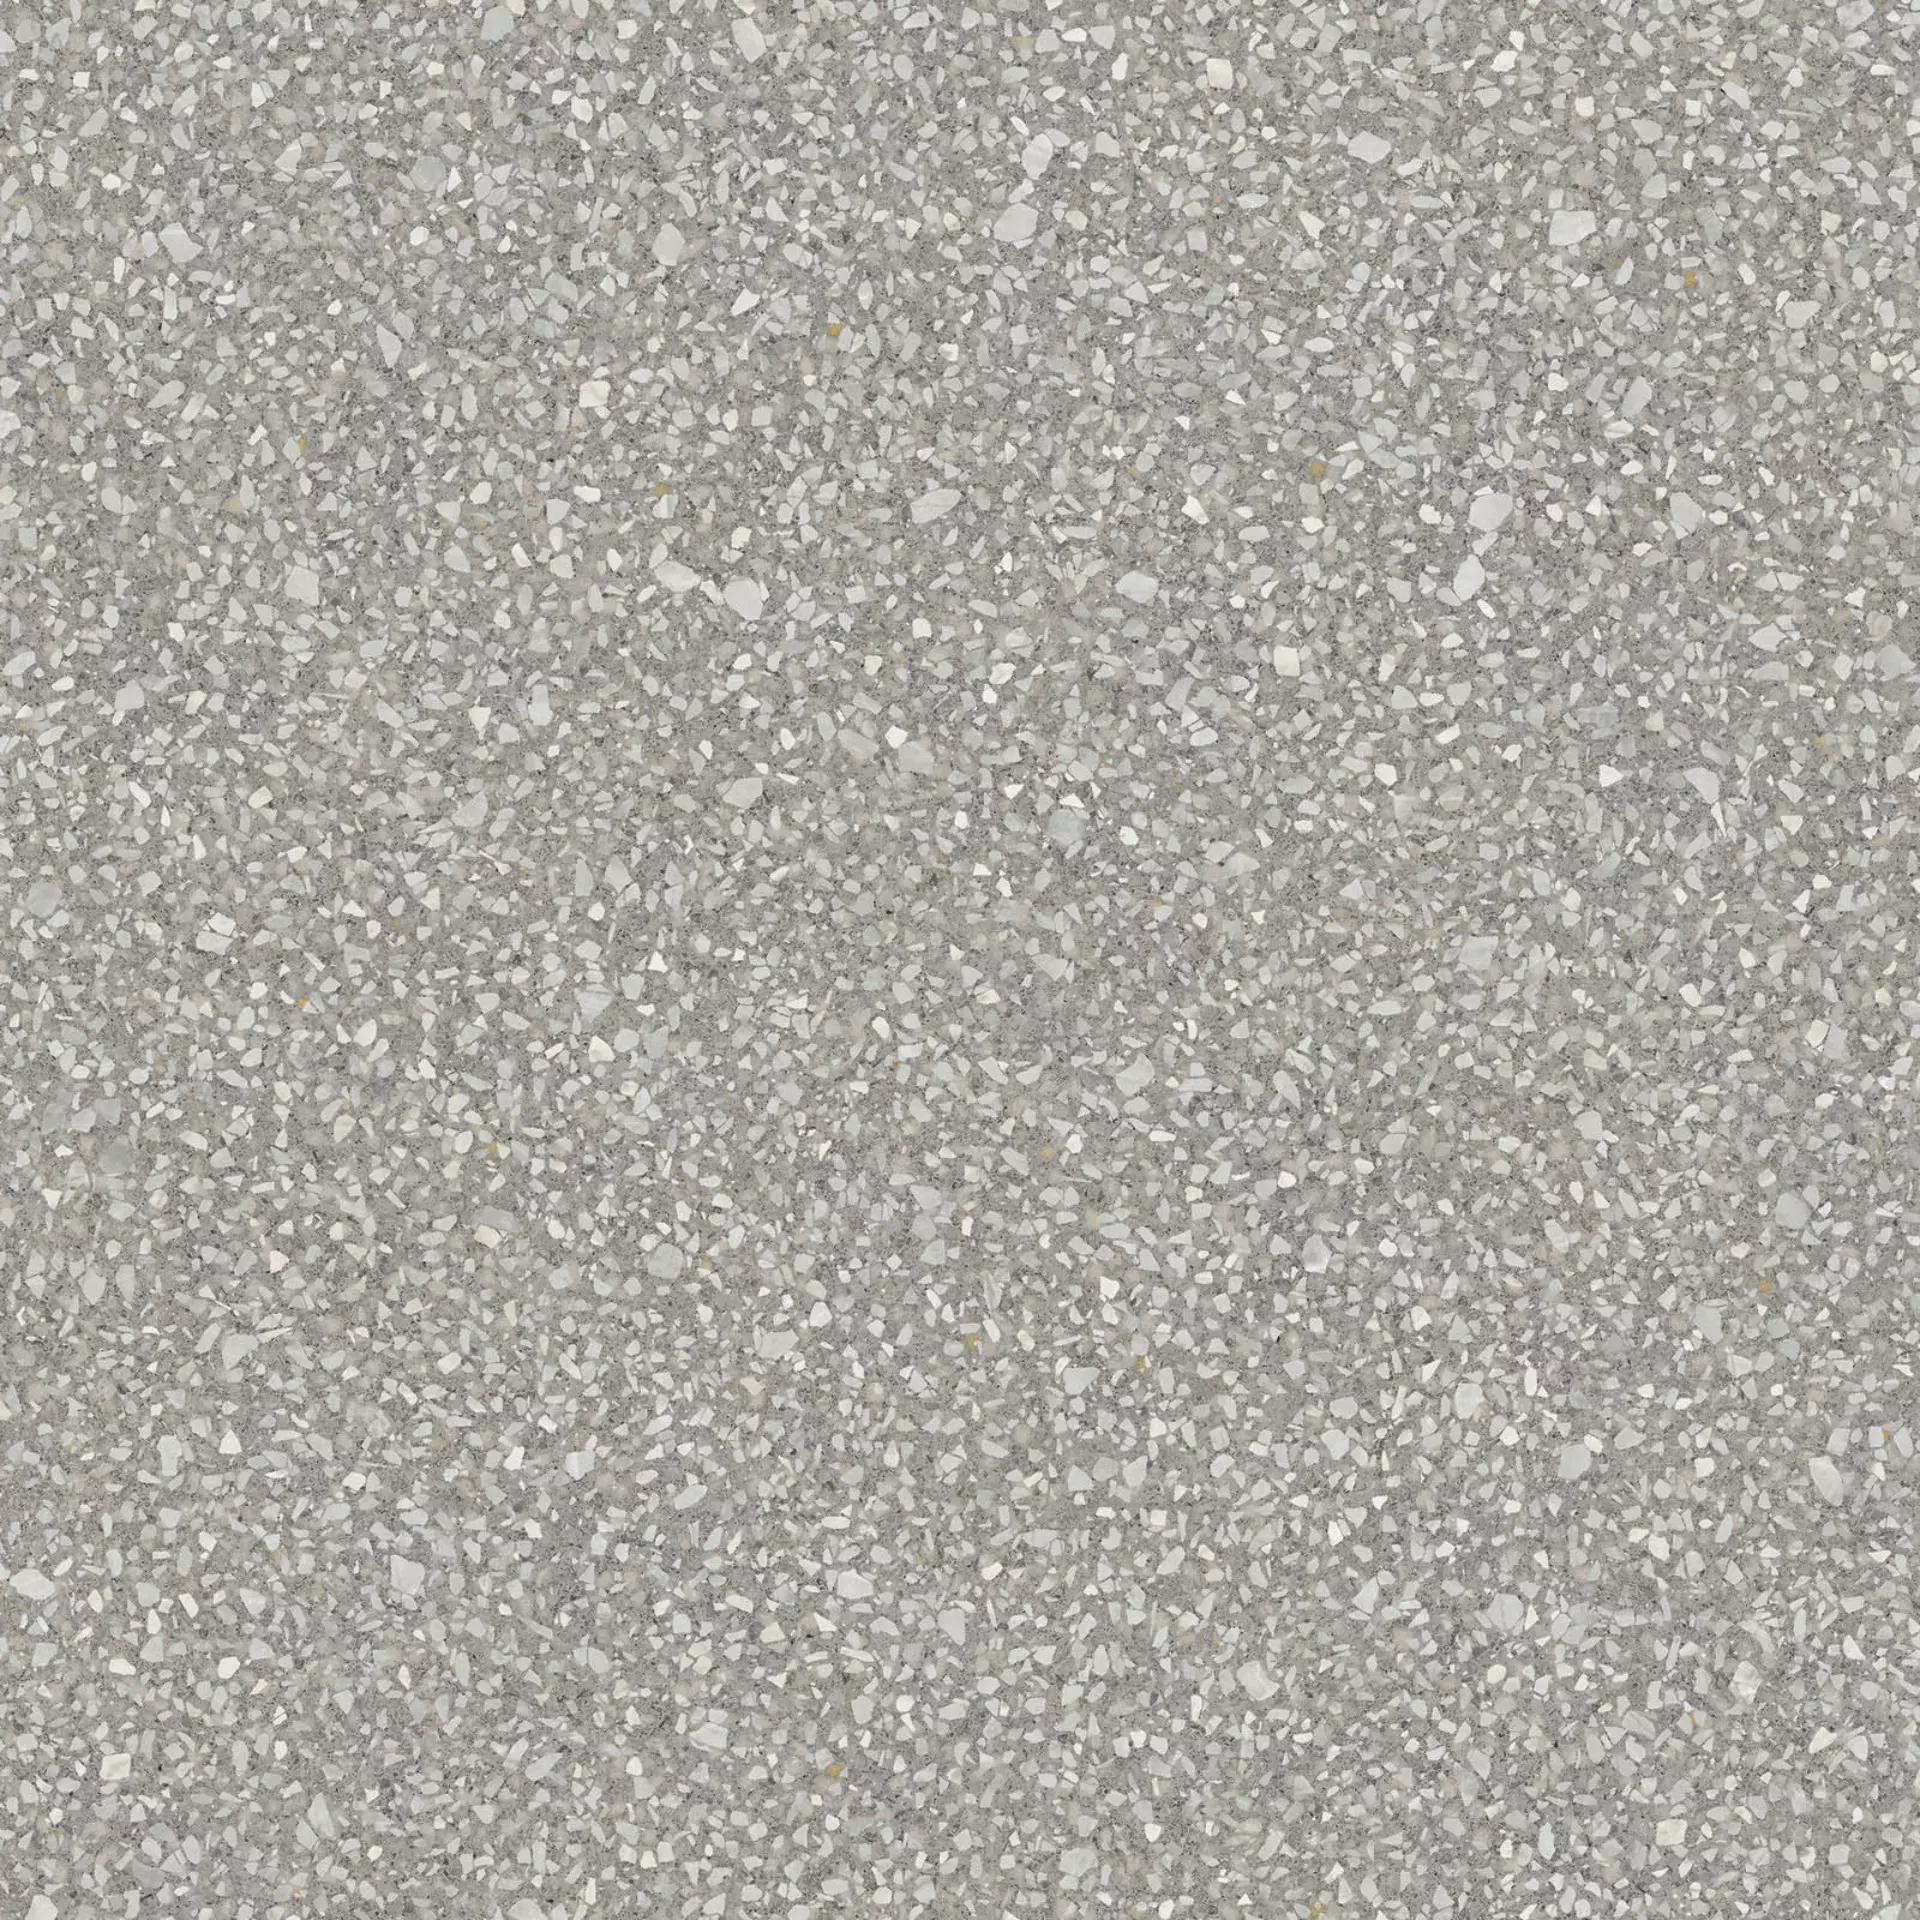 ABK Blend Dots Grey Naturale PF60006710 60x60cm rectified 8,5mm